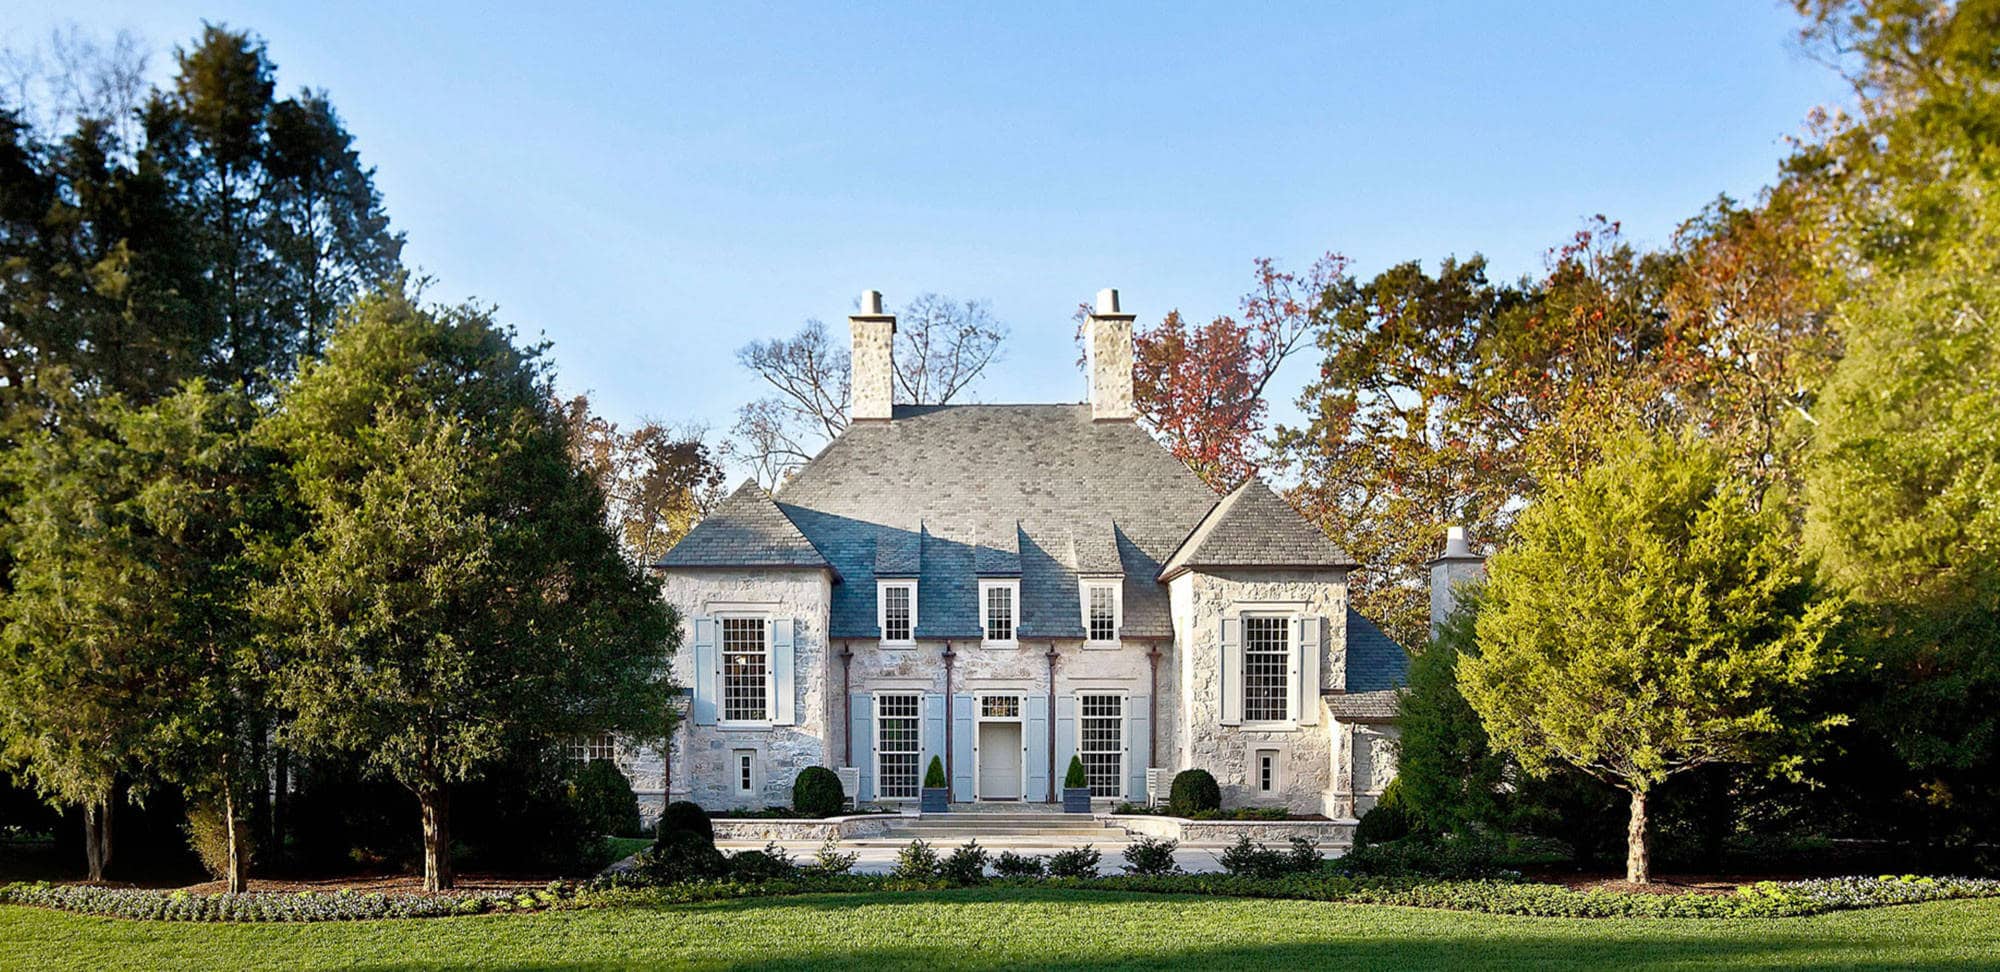 Home tour featuring a New Manor Residence in Morrocroft showcasing the stone exteriors with traditional style.